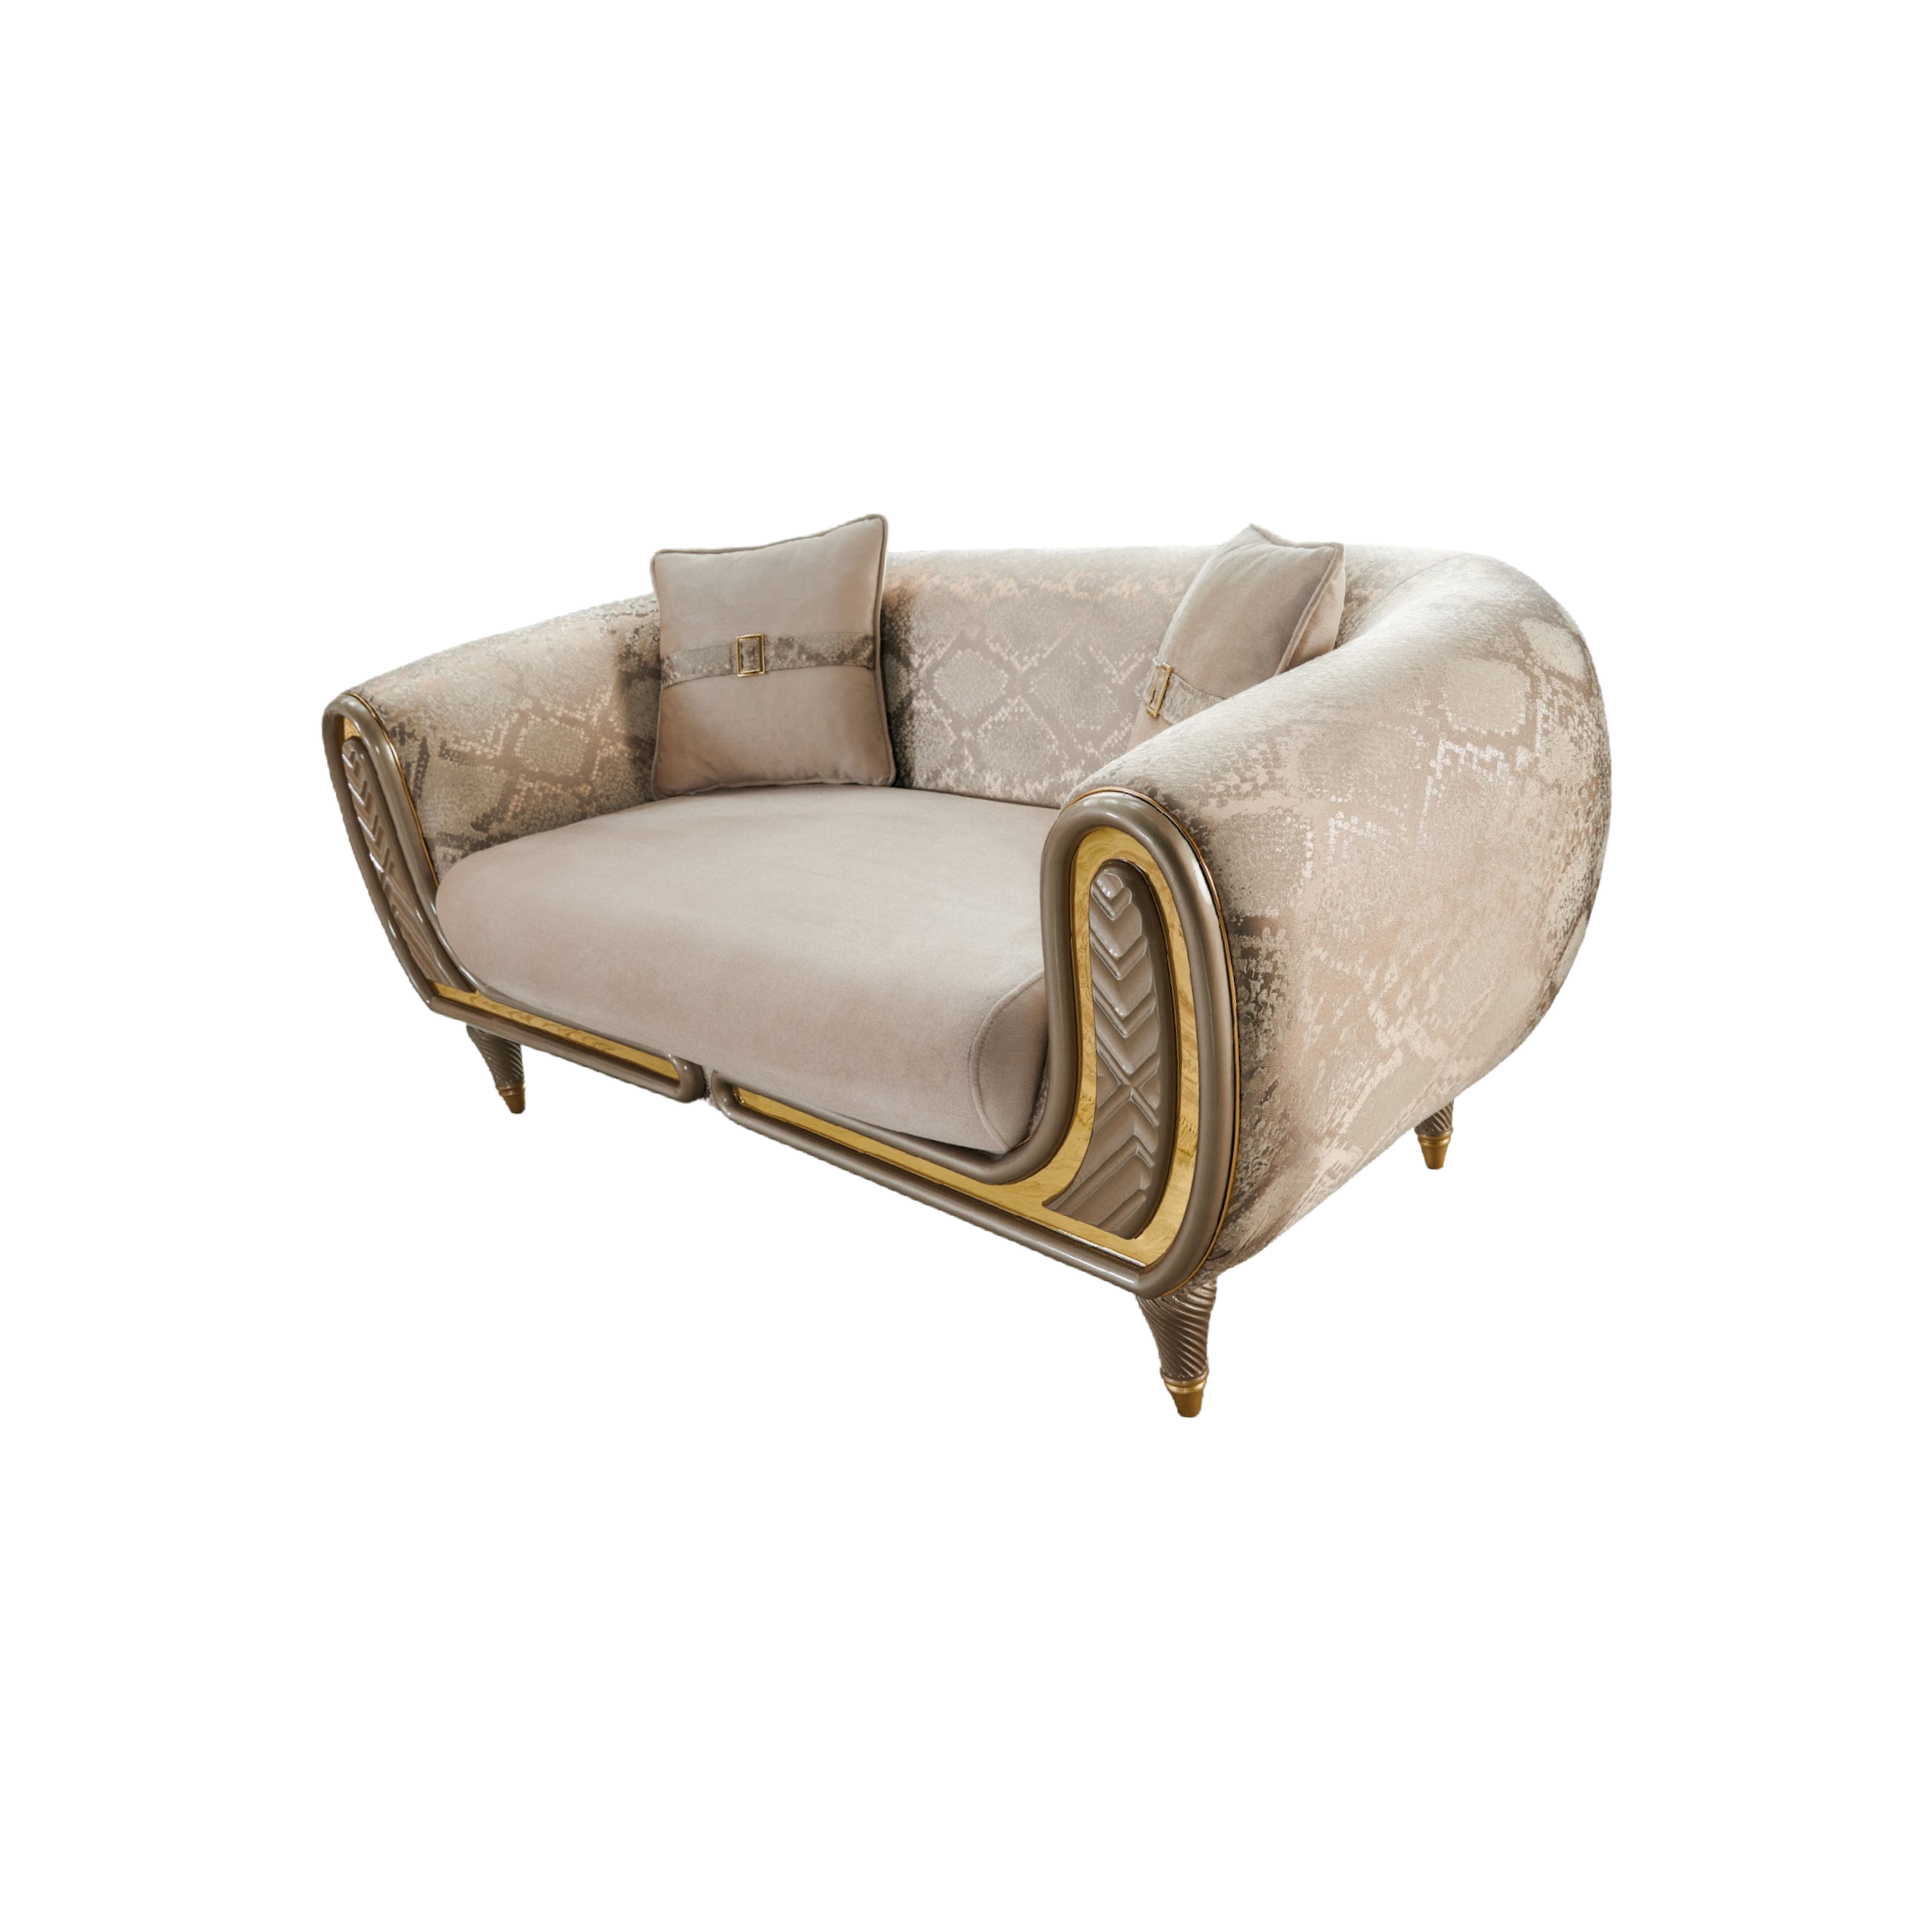 Lima Loveseat - Home Store Furniture